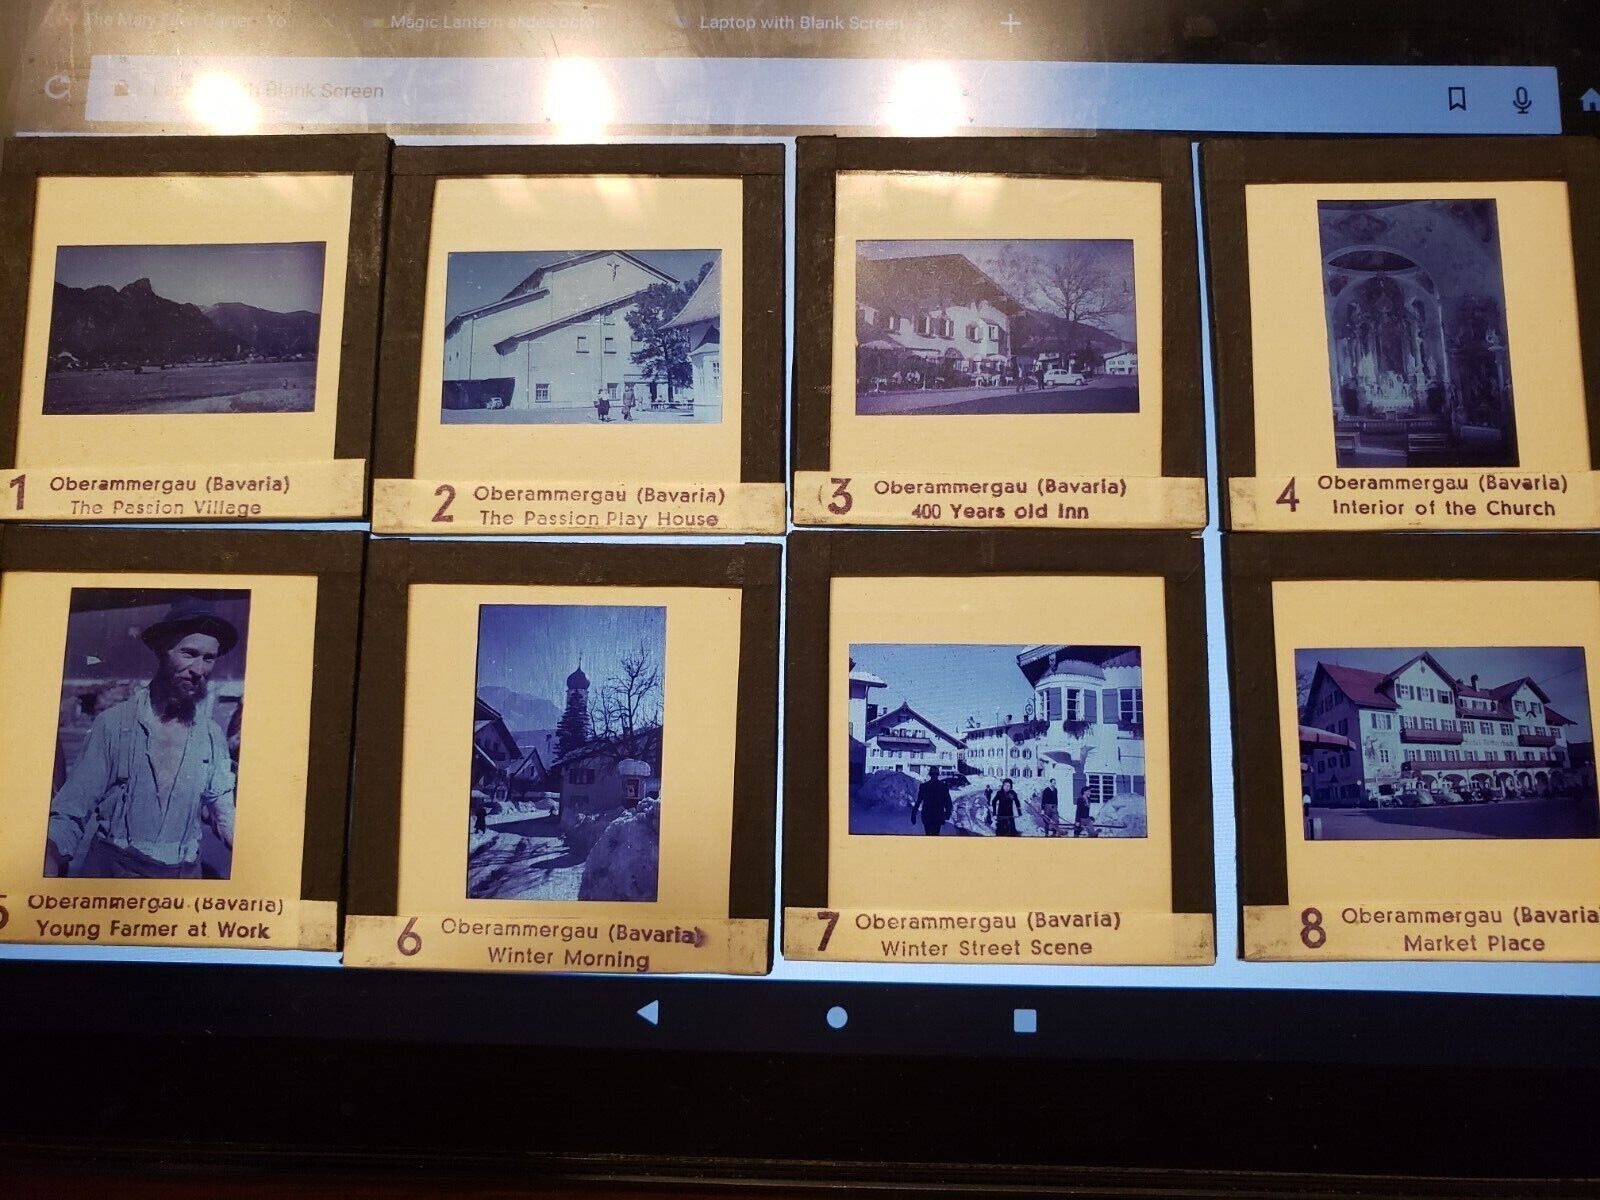 50 Color Magic Lantern Slides of the Passion Play Oberammergau 1950